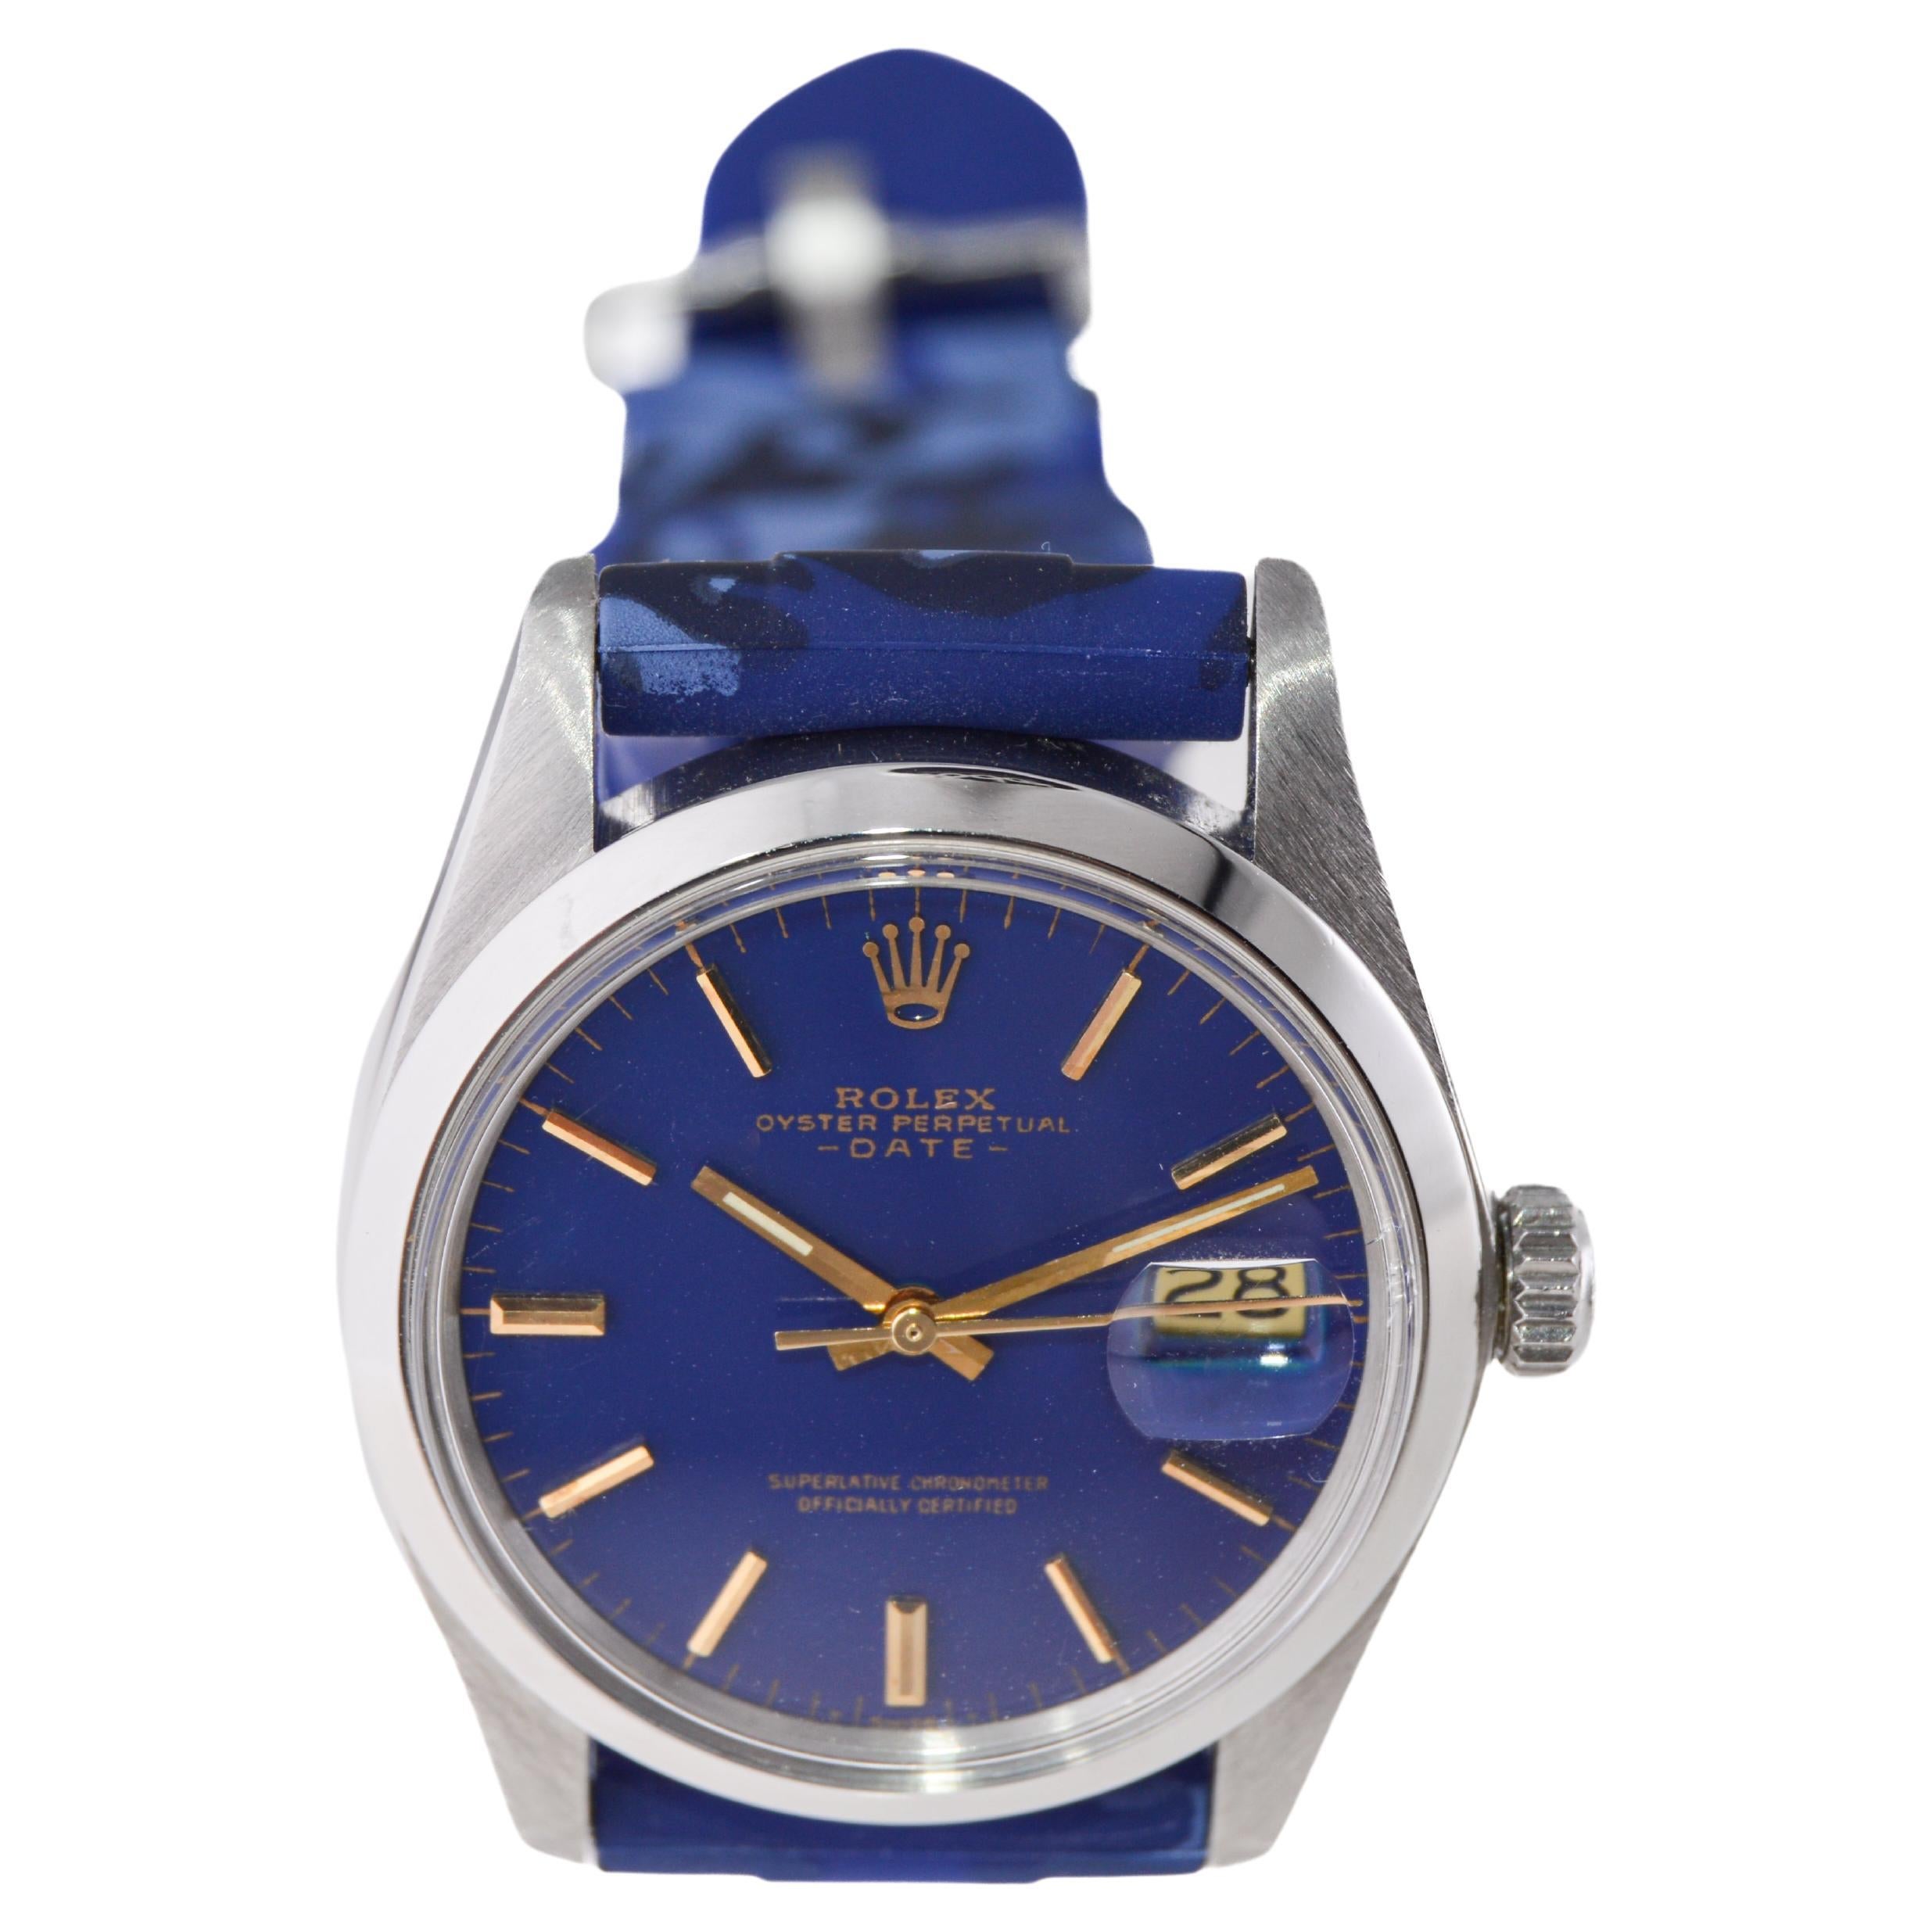 Modern Rolex Oyster Perpetual Date With Custom Blue Dial 1975